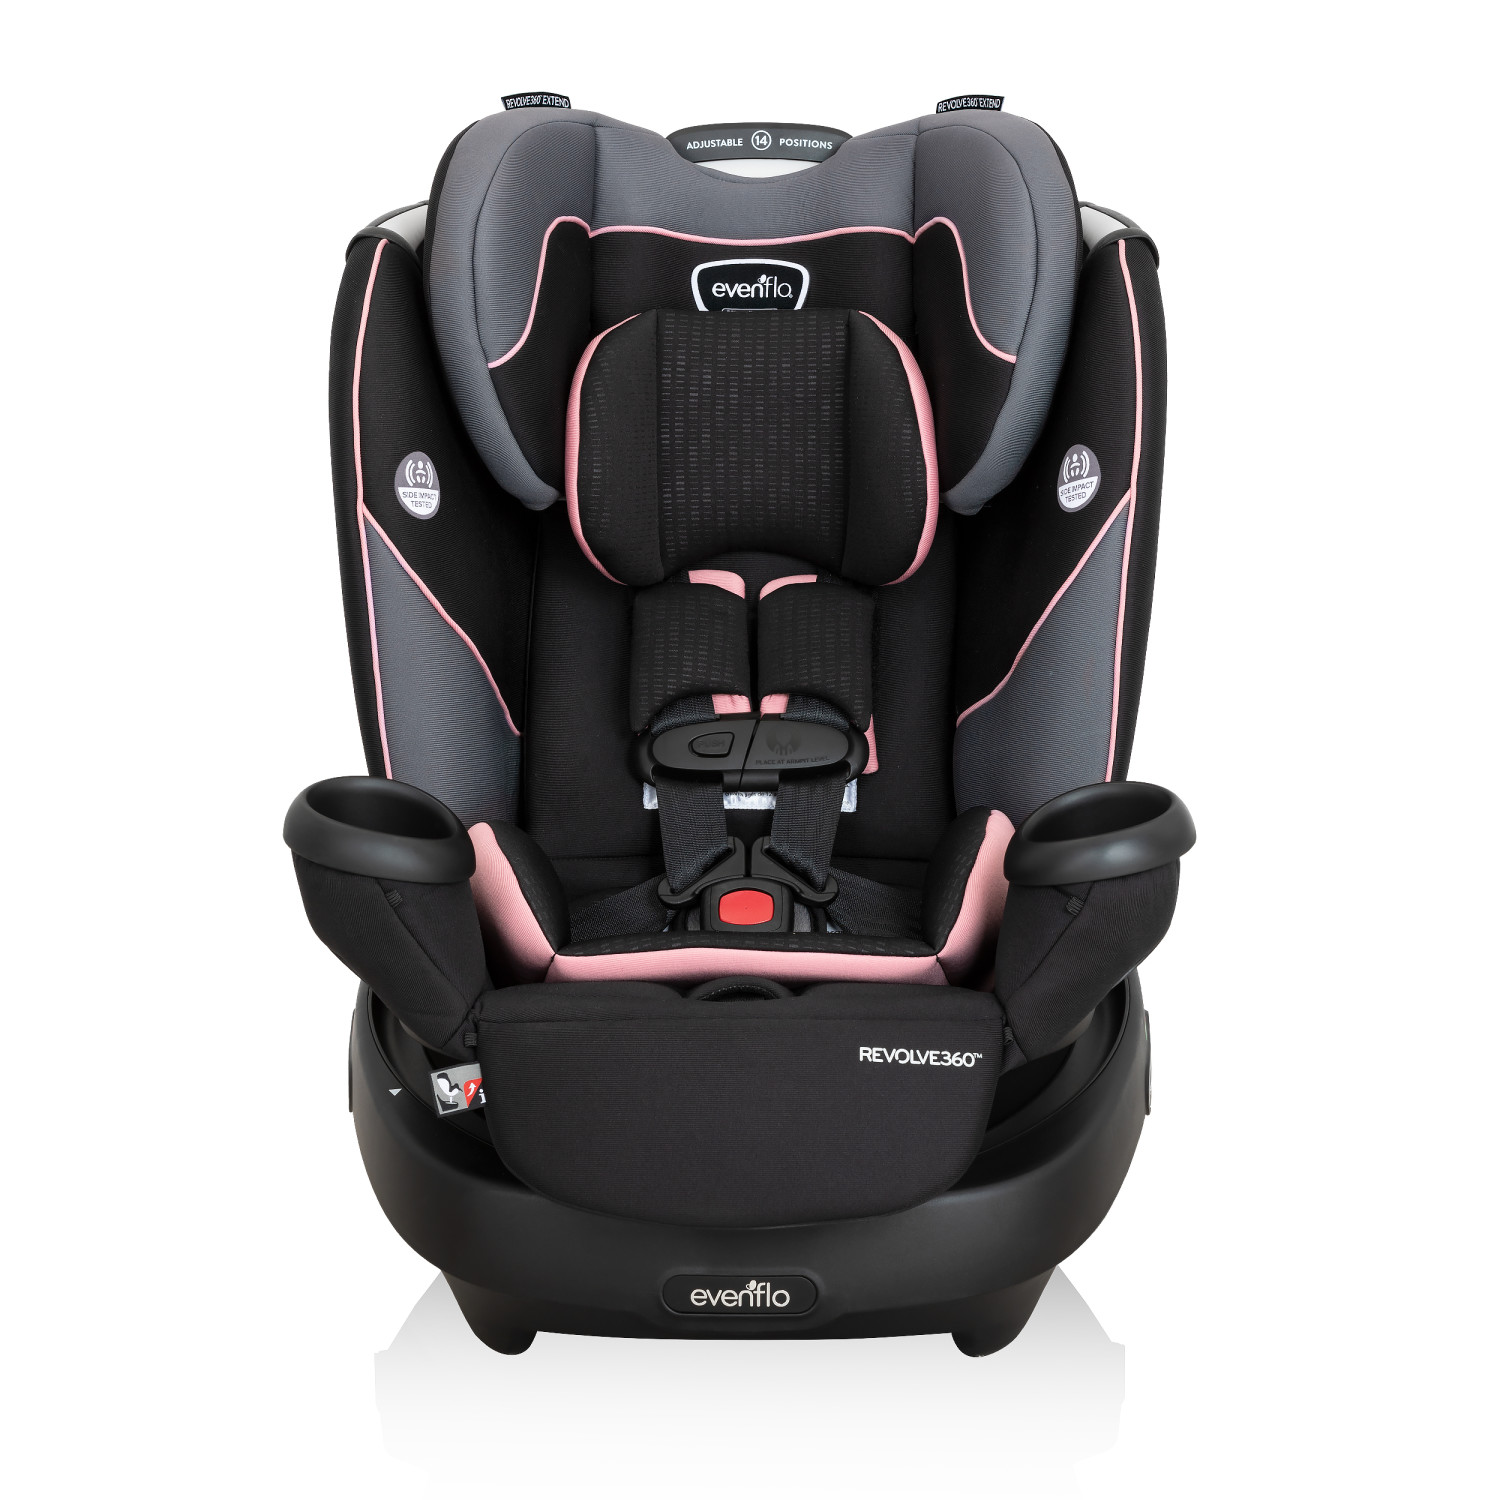 Evenflo Revolve360 Rotational All-In-One Convertible Car Seat (Ainsley Pink) - image 1 of 26